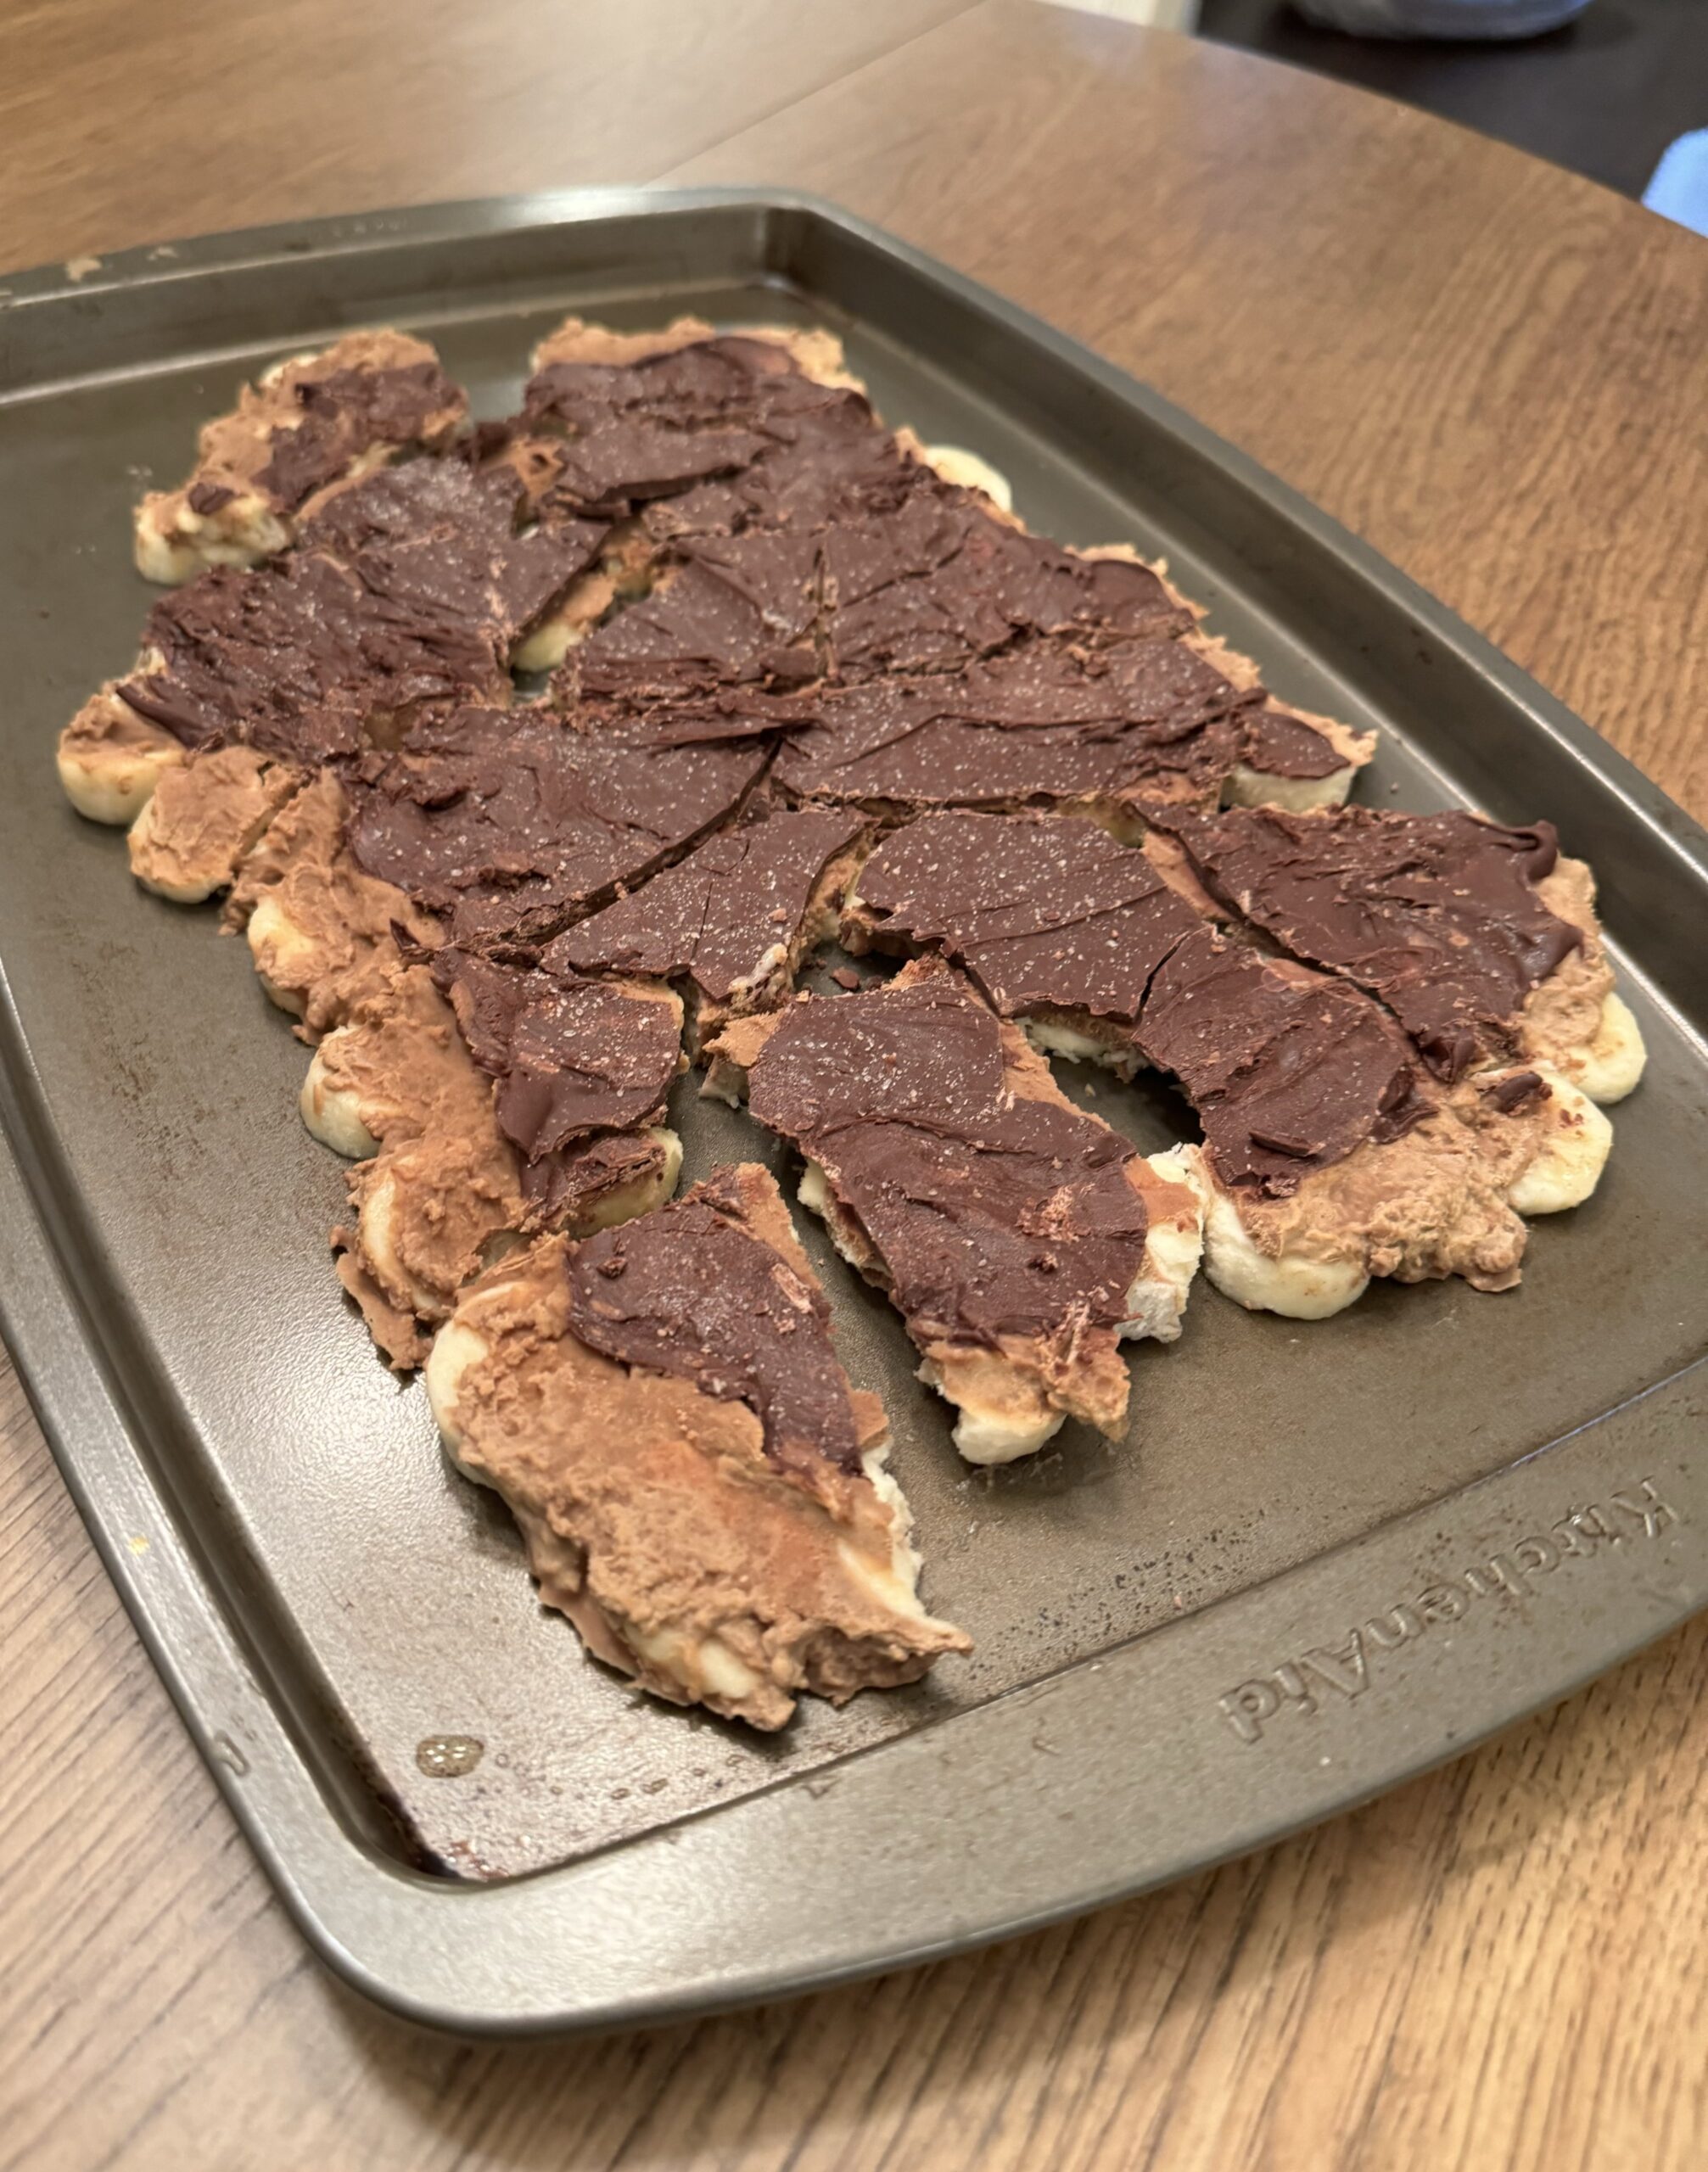 High Protein Chocolate Peanut Butter Banana Bark cut into pieces on a baking sheet